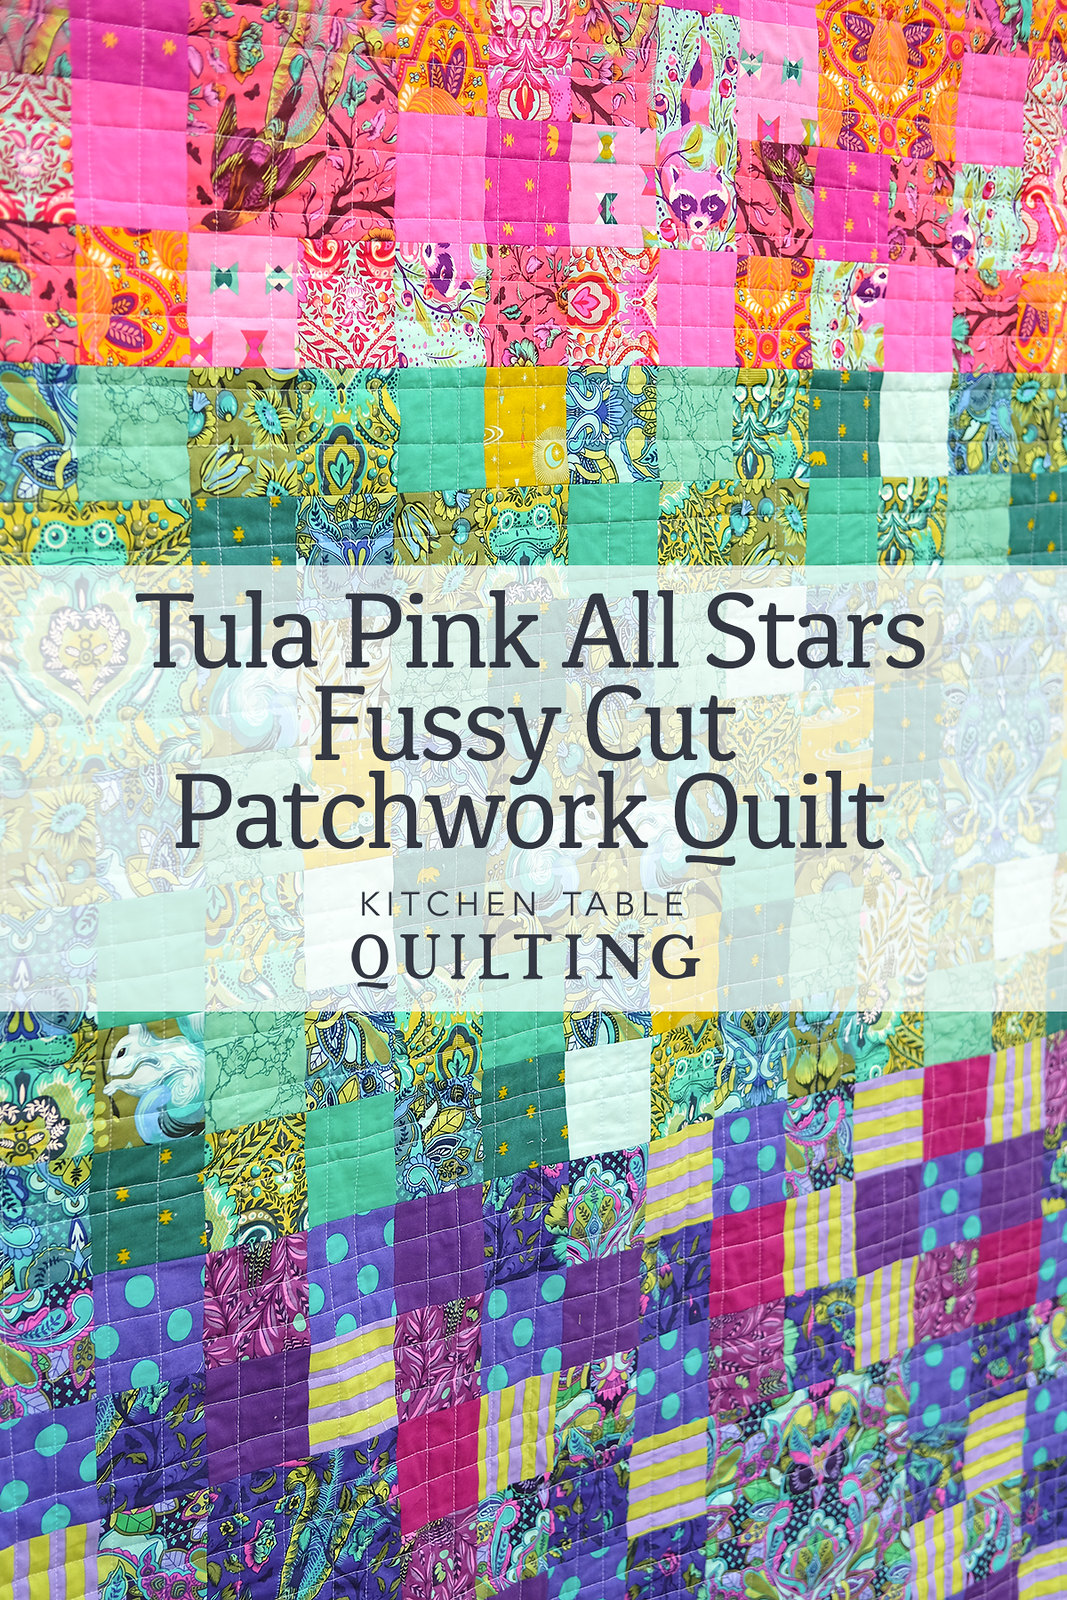 Tula Pink All Stars Fussy Cut Patchwork Quilt